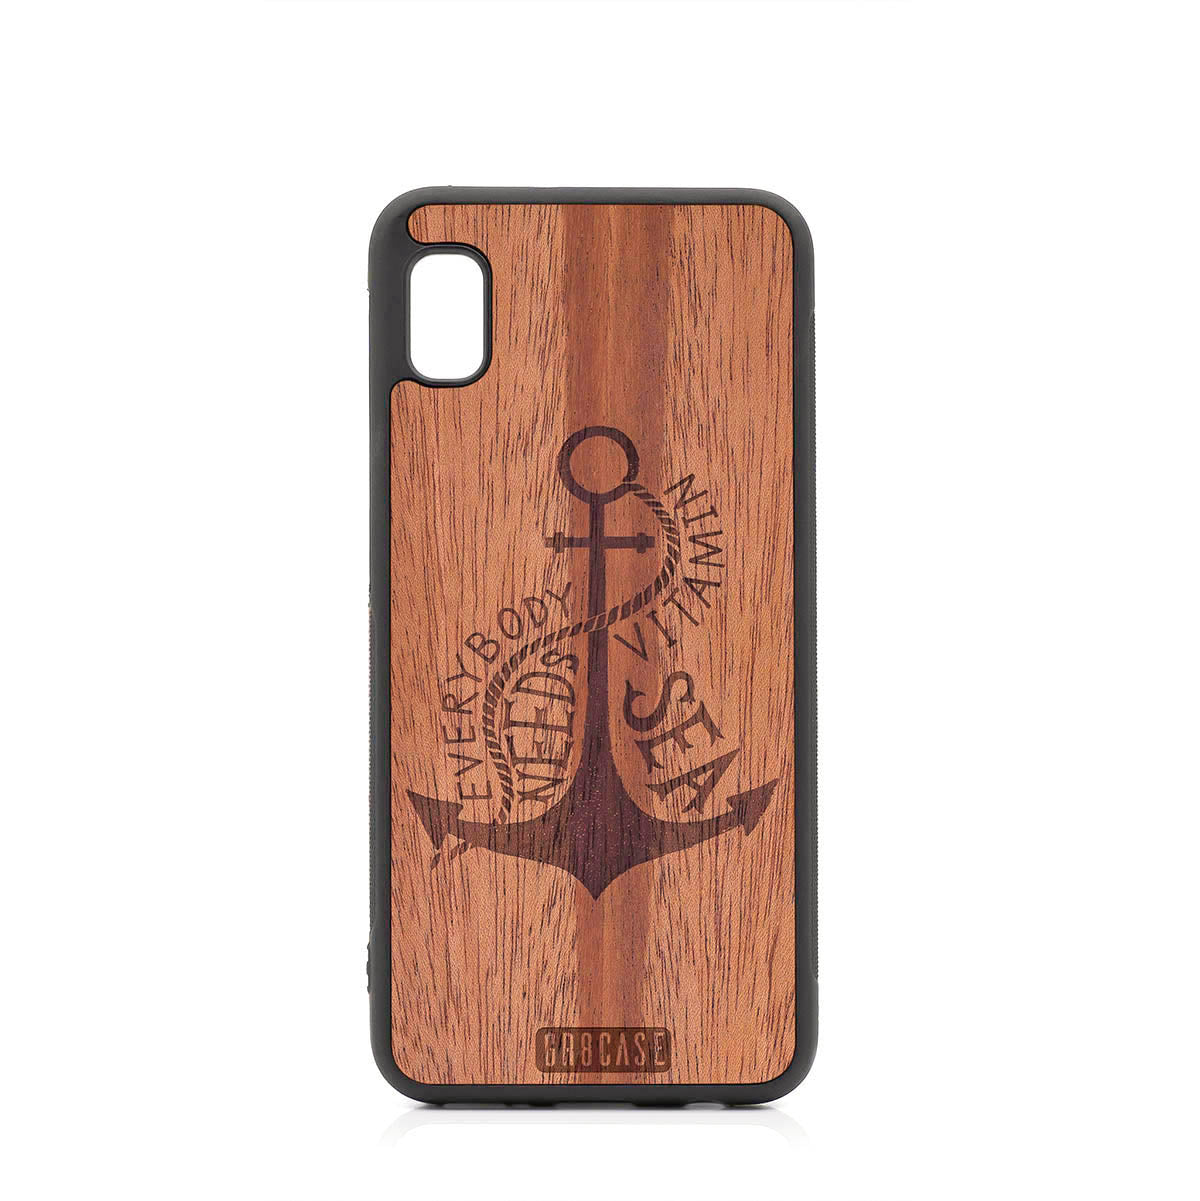 Everybody Needs Vitamin Sea (Anchor) Design Wood Case For Samsung Galaxy S10E by GR8CASE